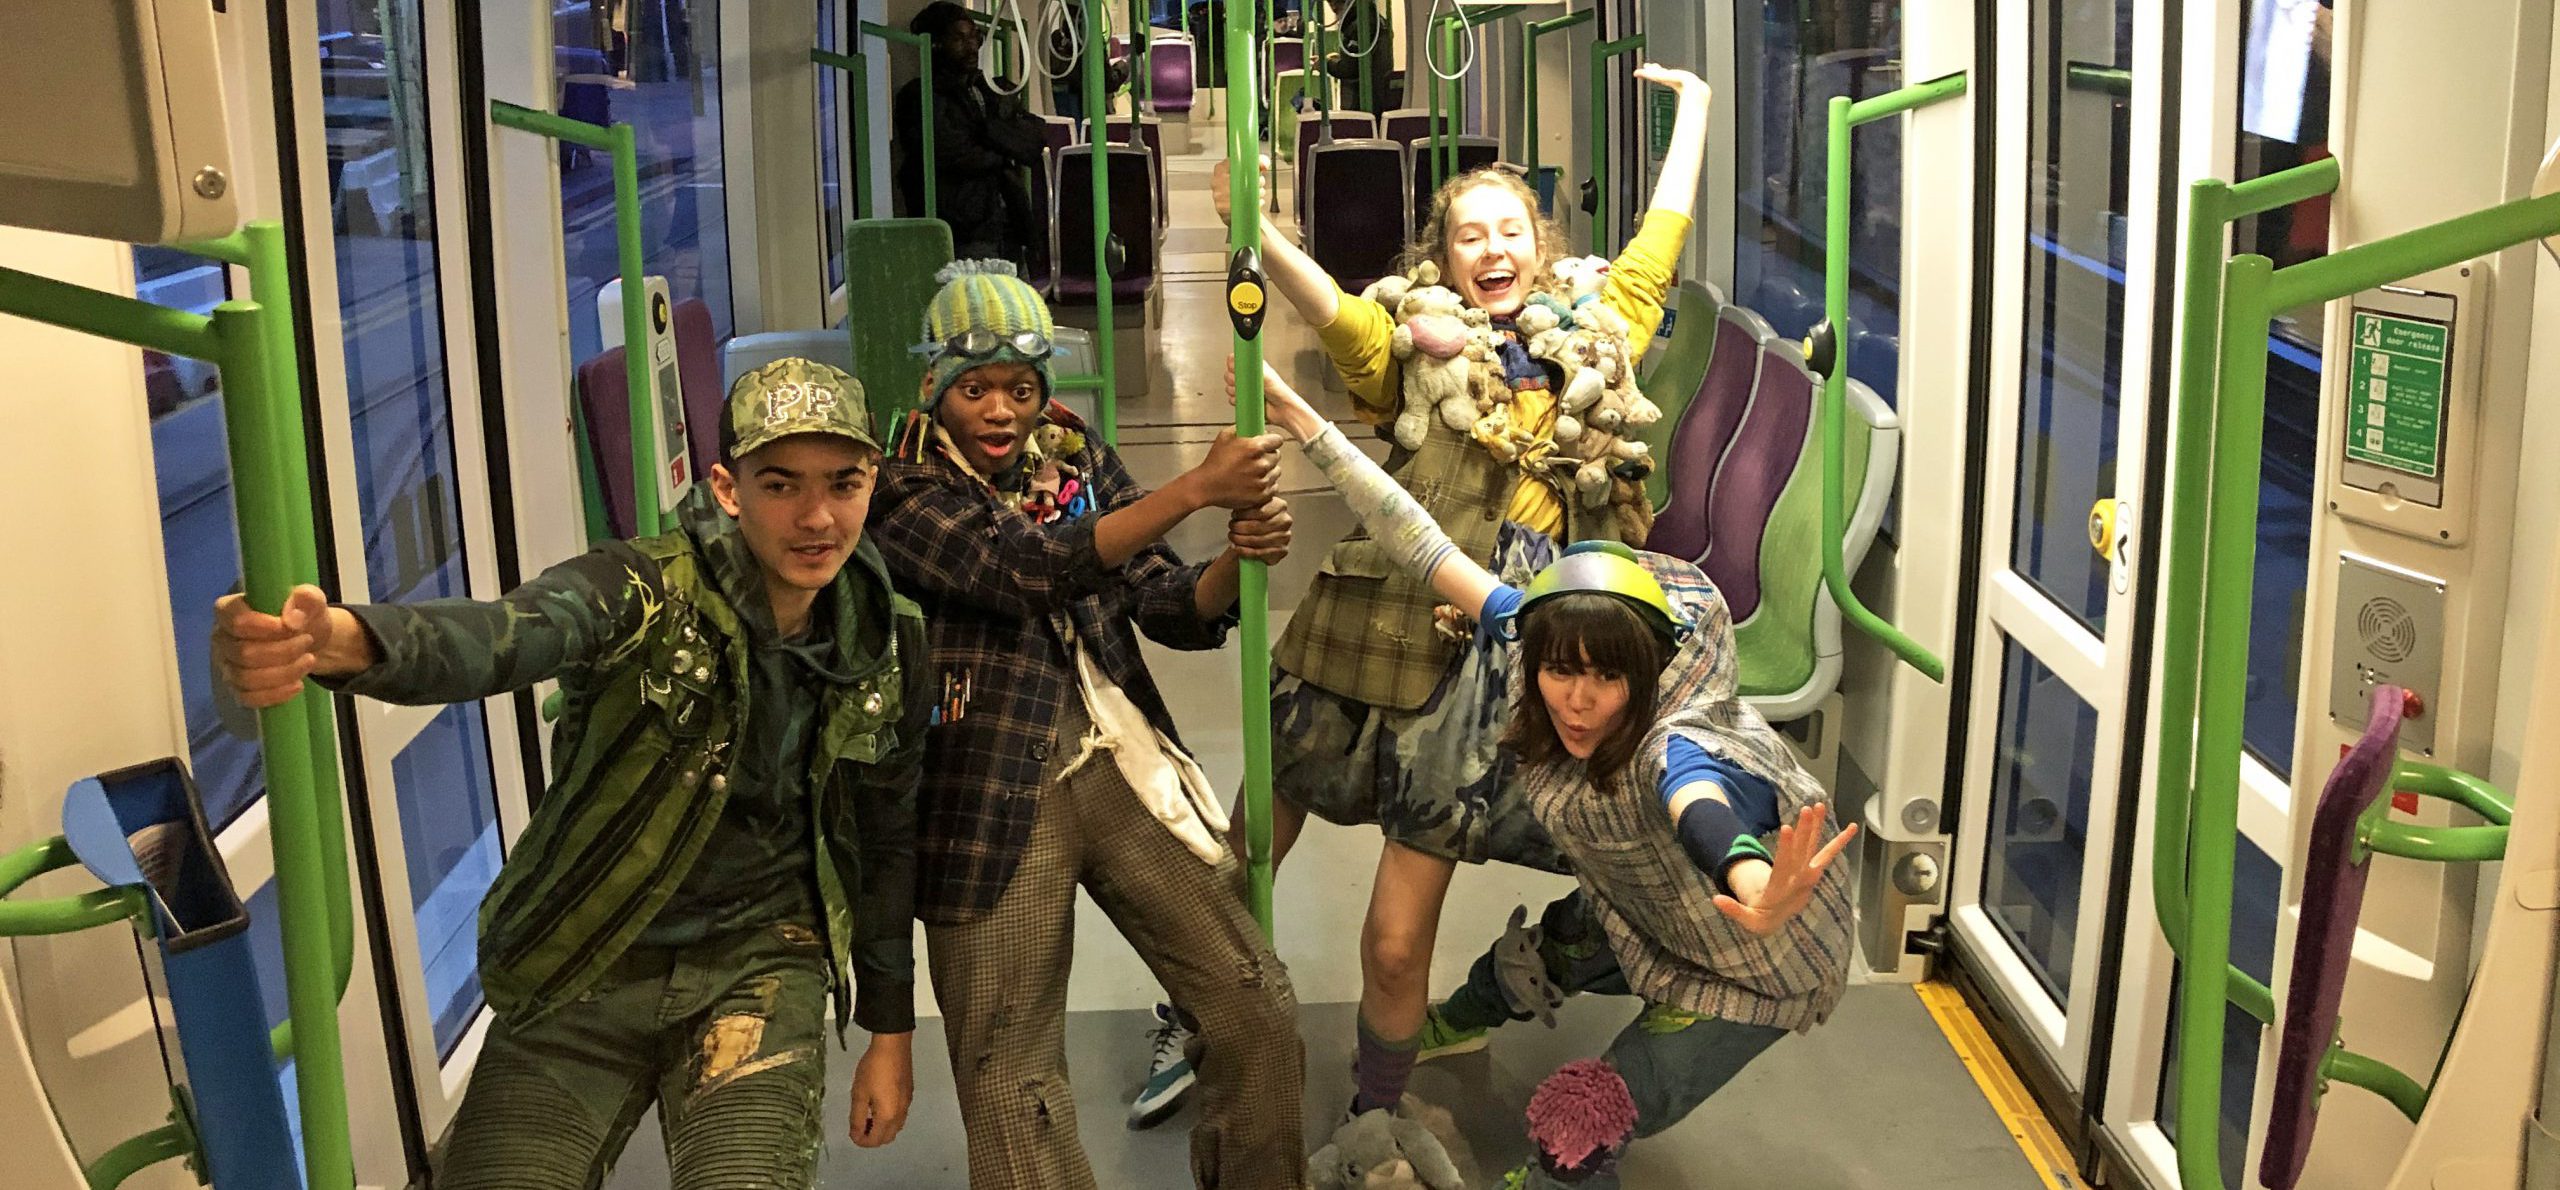 Four young people dressed in Peter Pan costumes posing on the tram